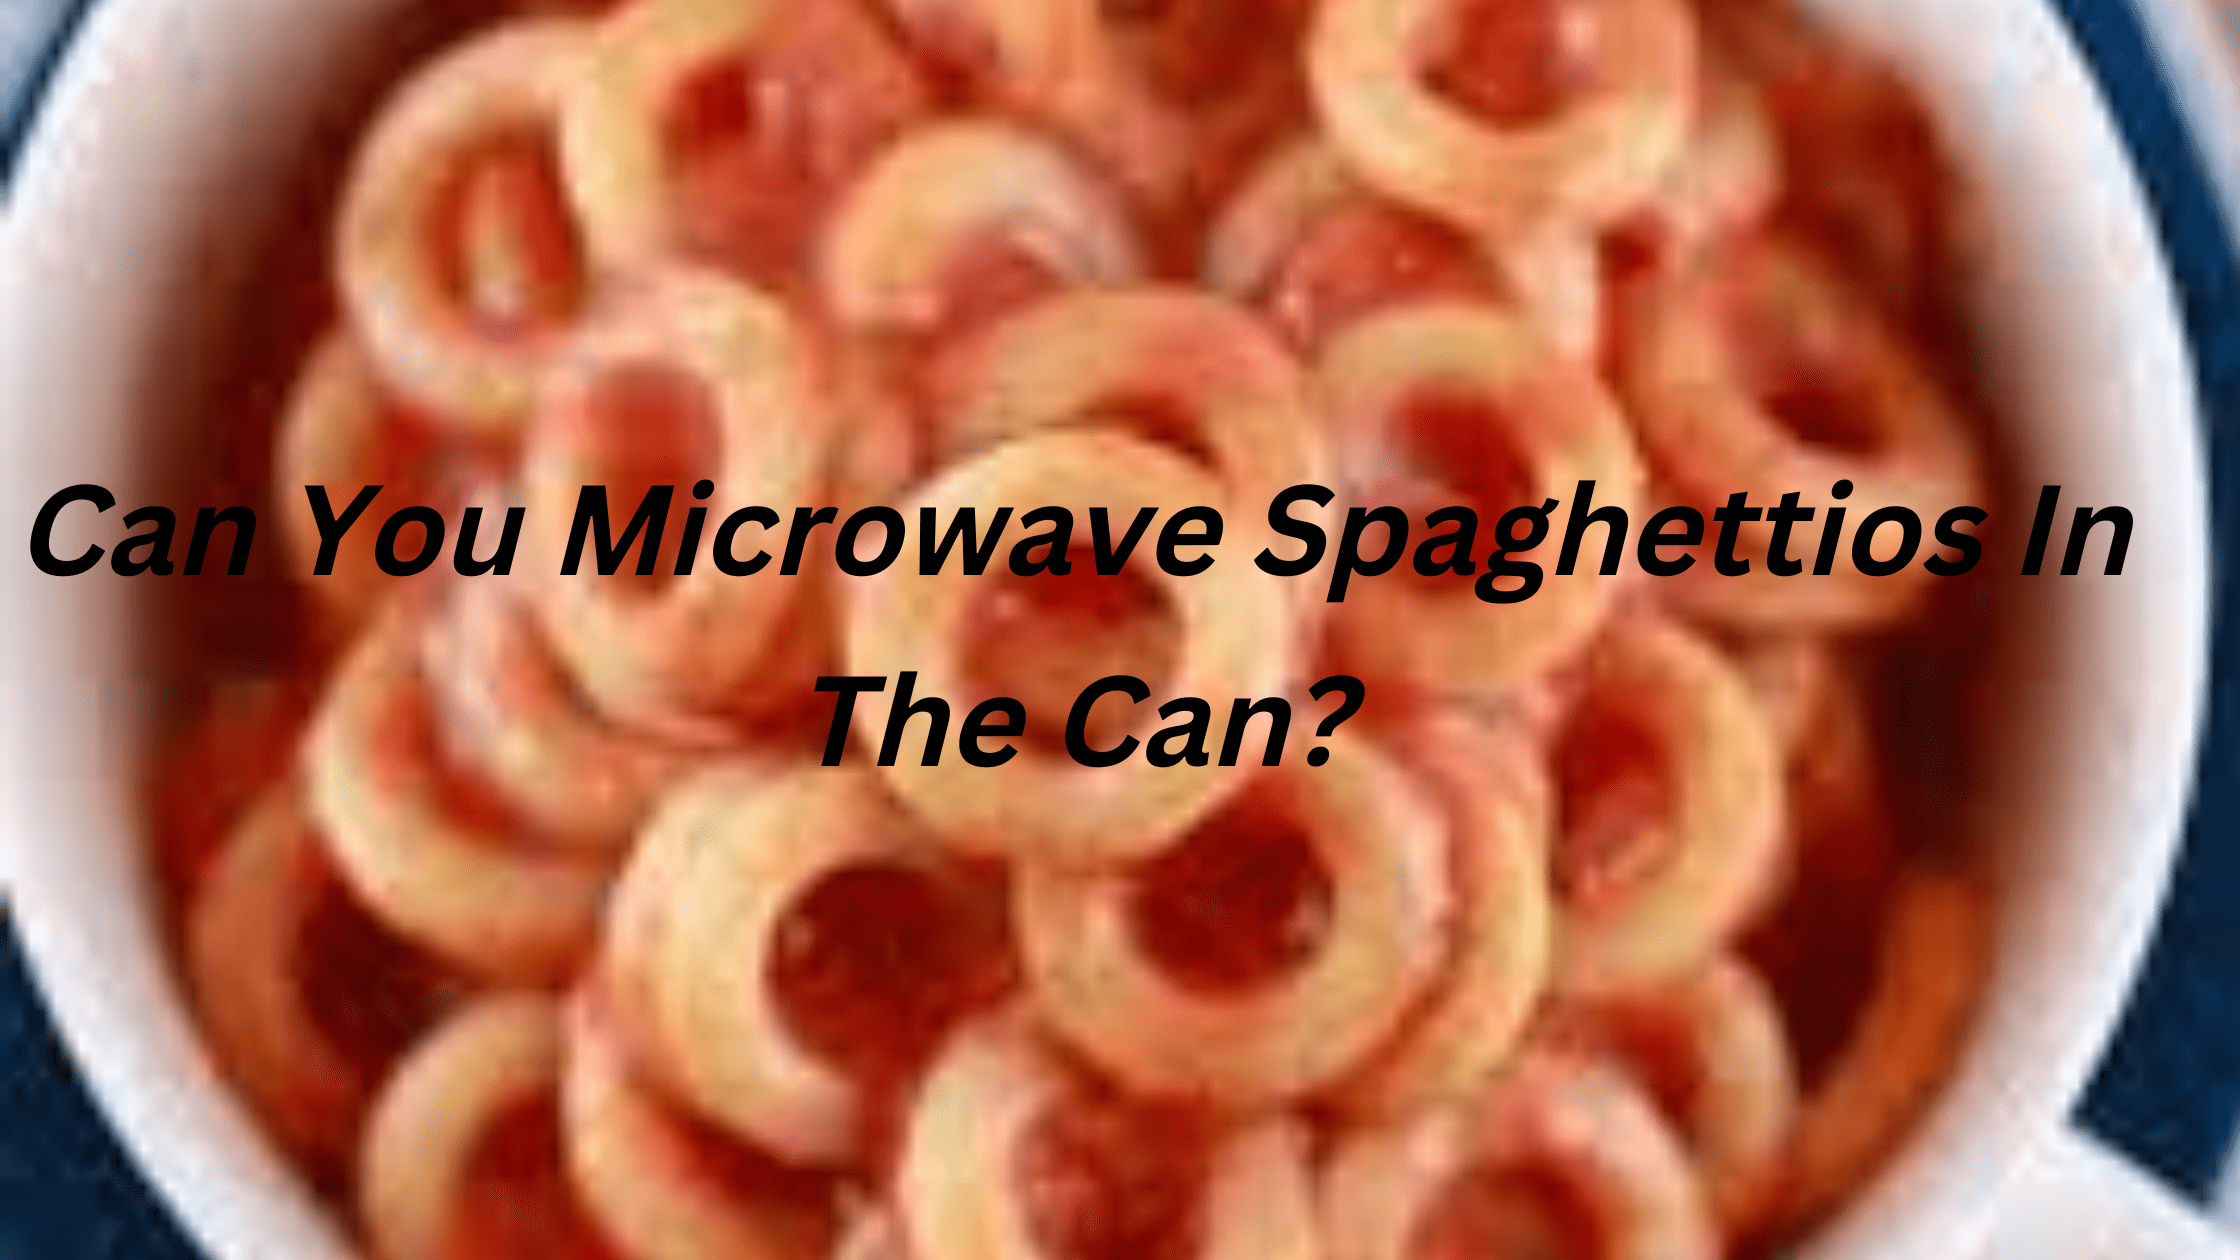 Can You Microwave Spaghettios In The Can?